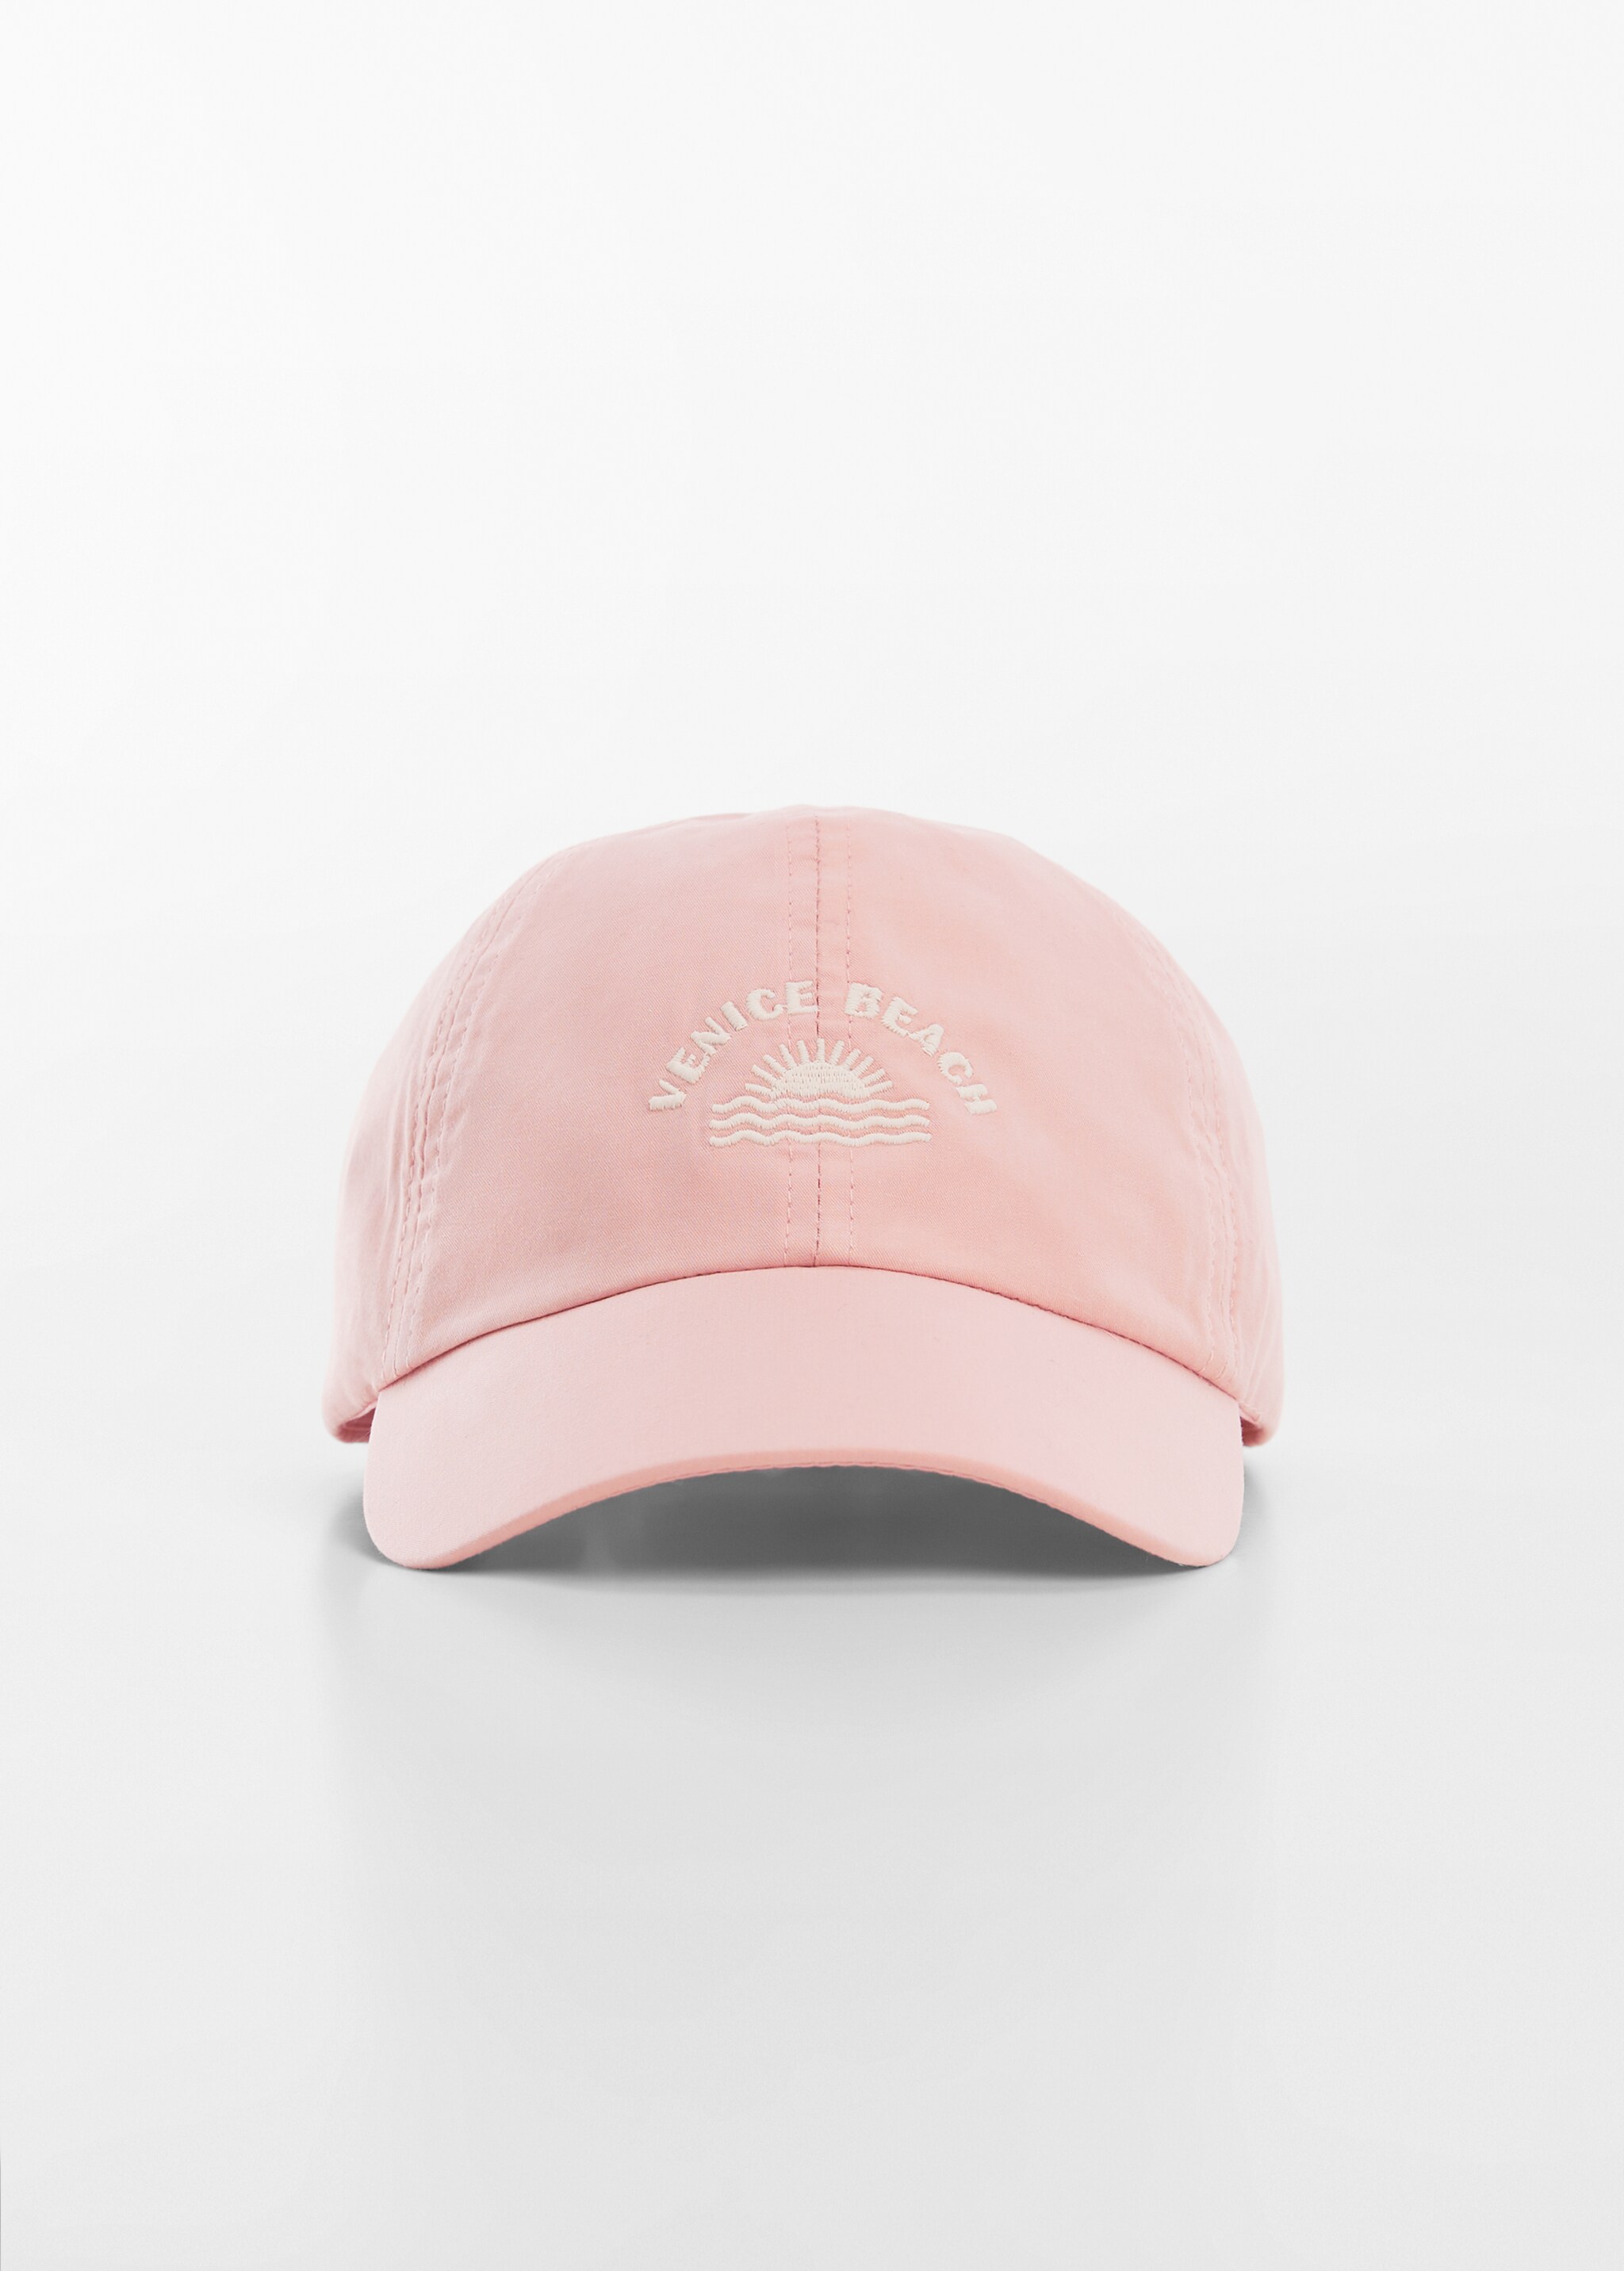 Cap with embroidered letter  - Medium plane